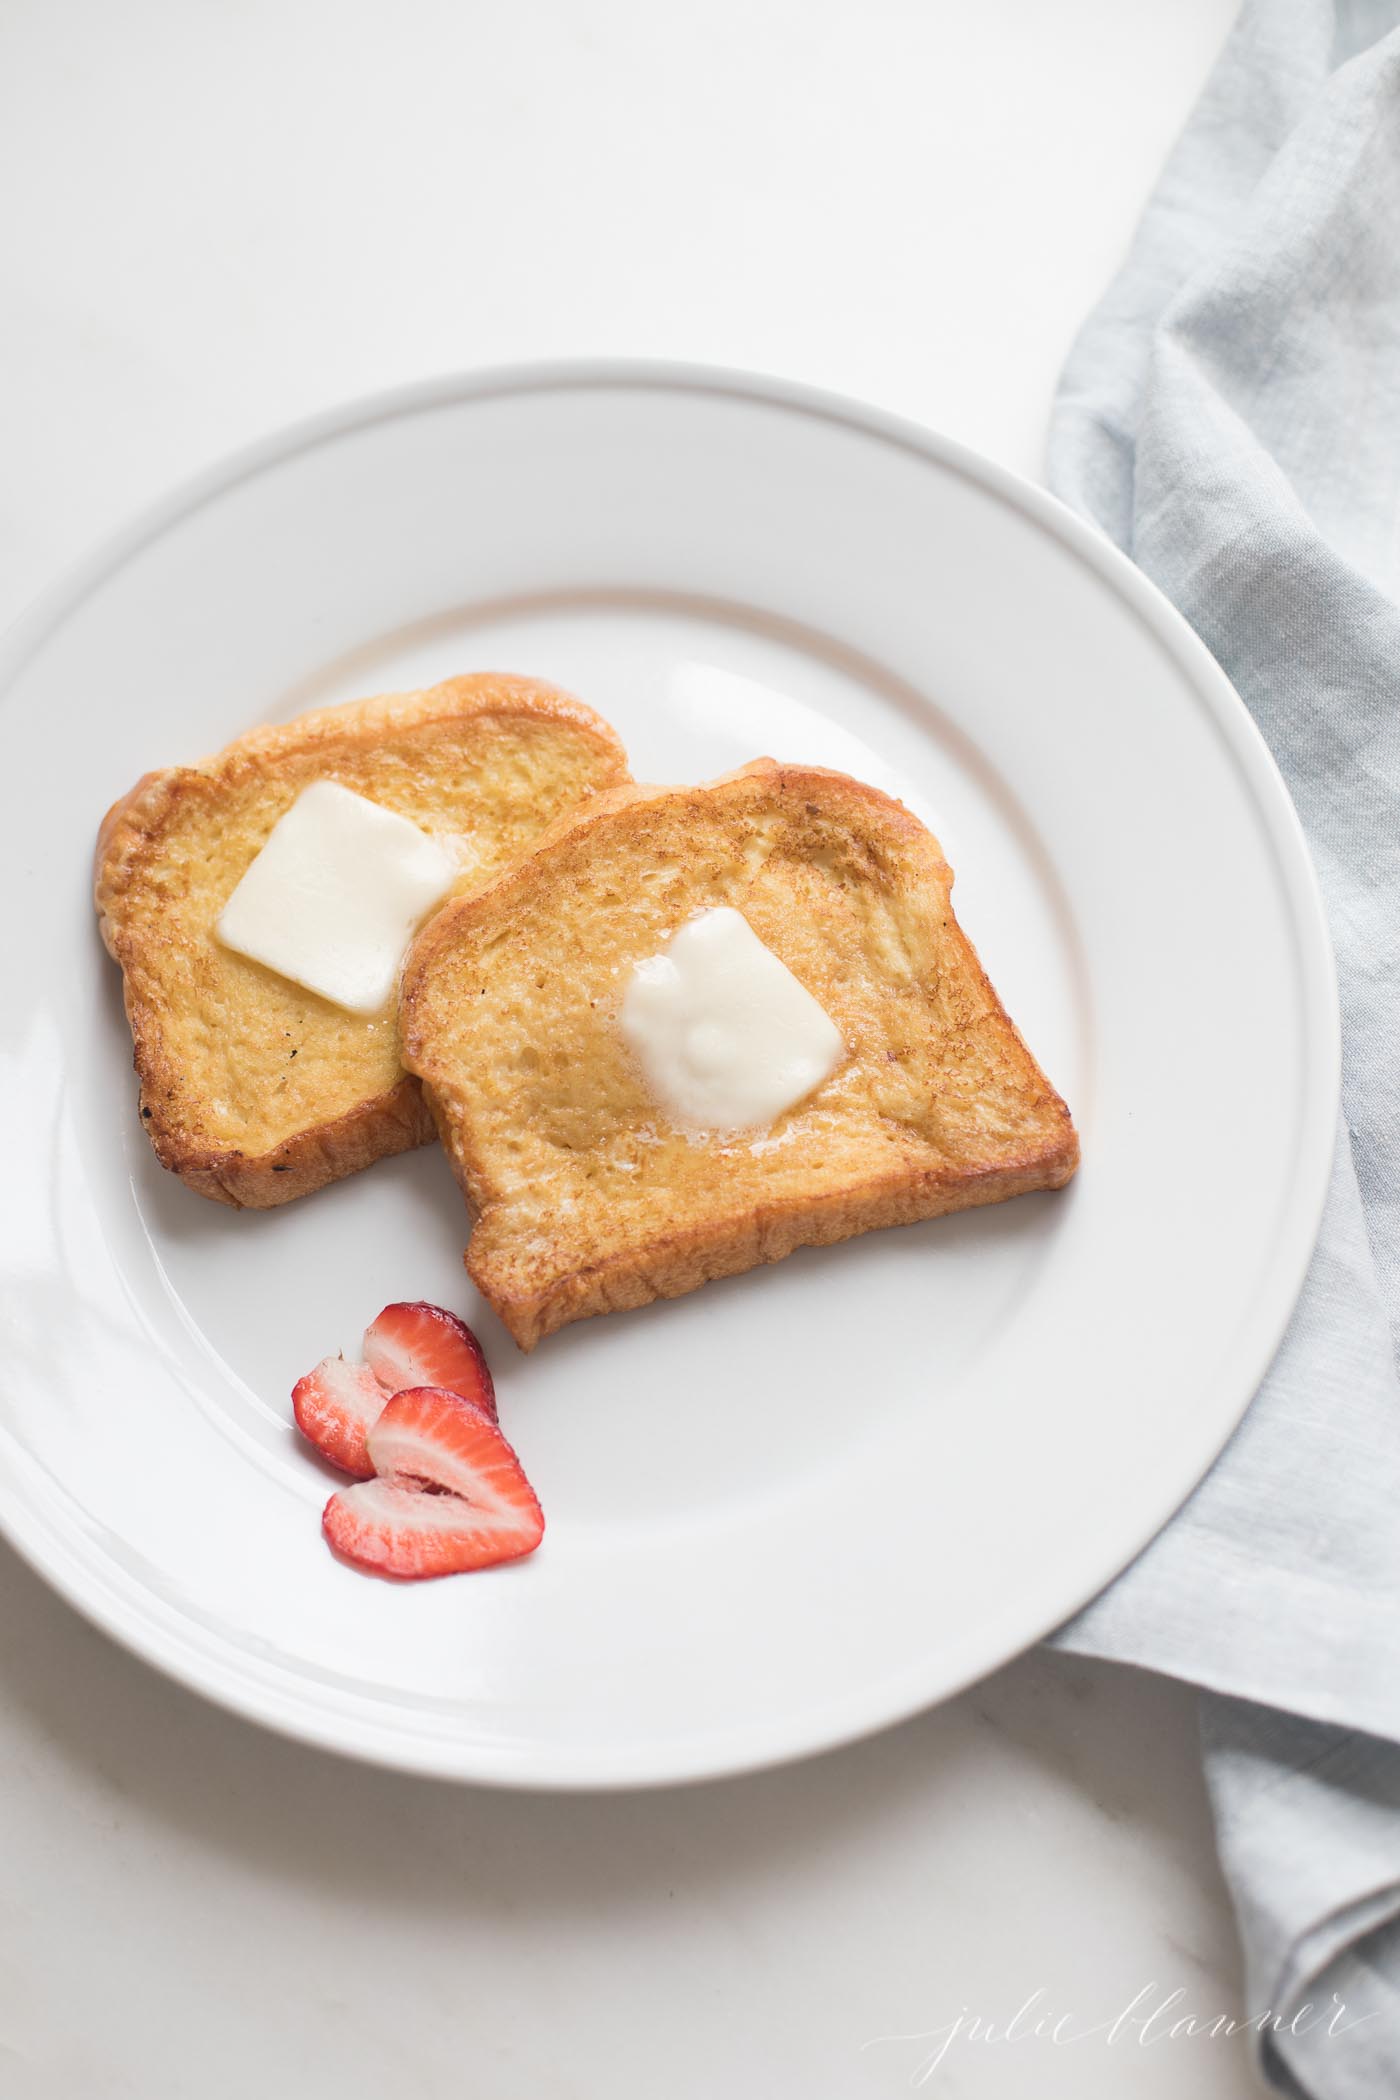 Brioche French toast topped with butter on a white plate, sliced strawberries as garnish.